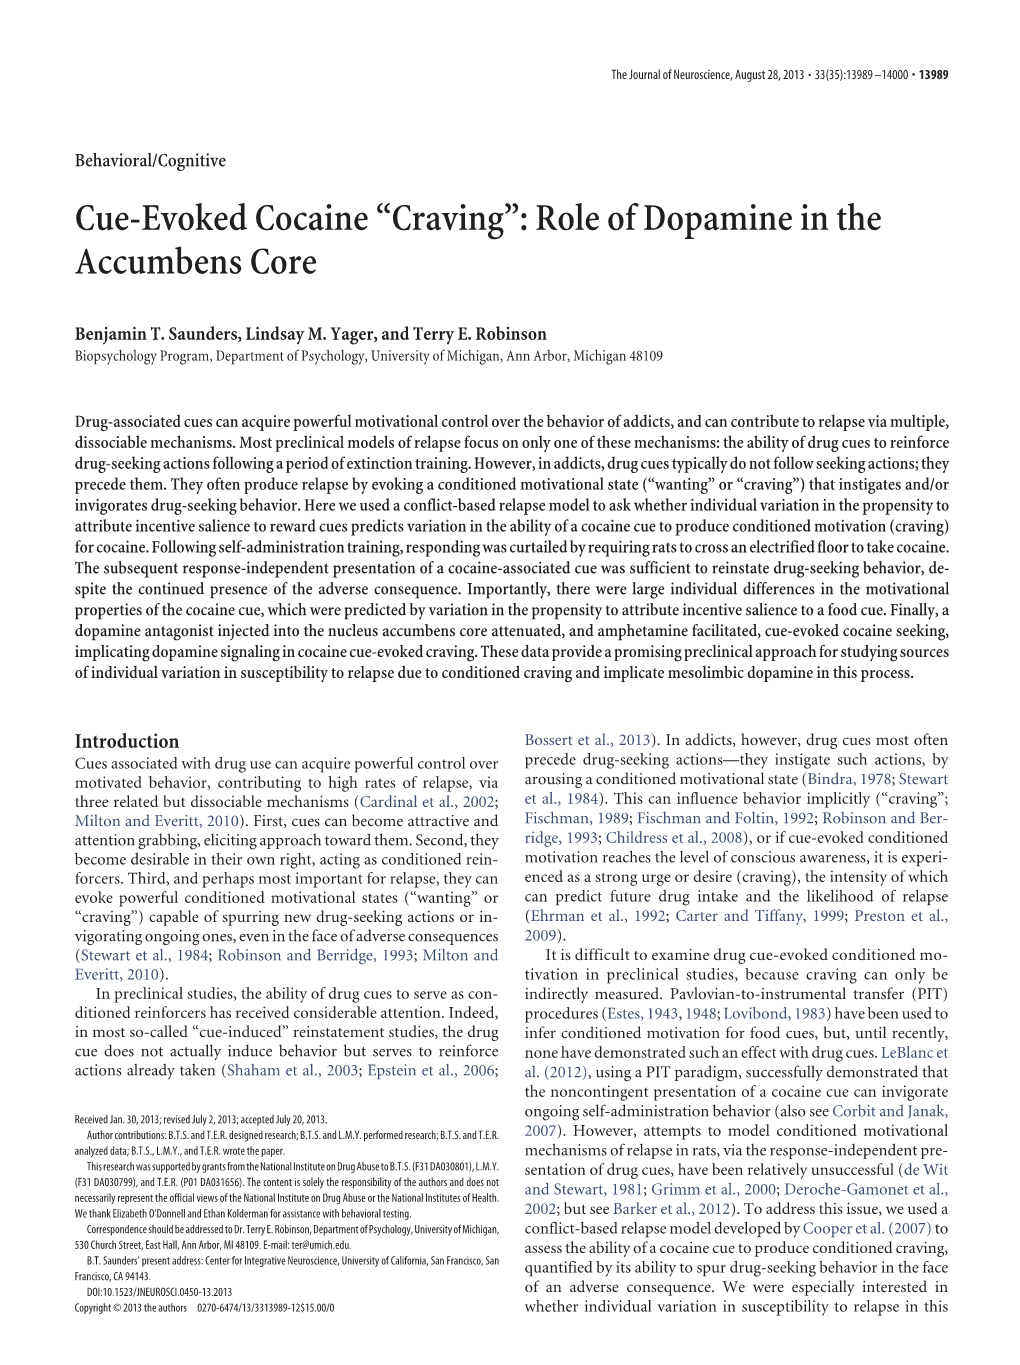 Cue-Evoked Cocaine “Craving”: Role of Dopamine in the Accumbens Core